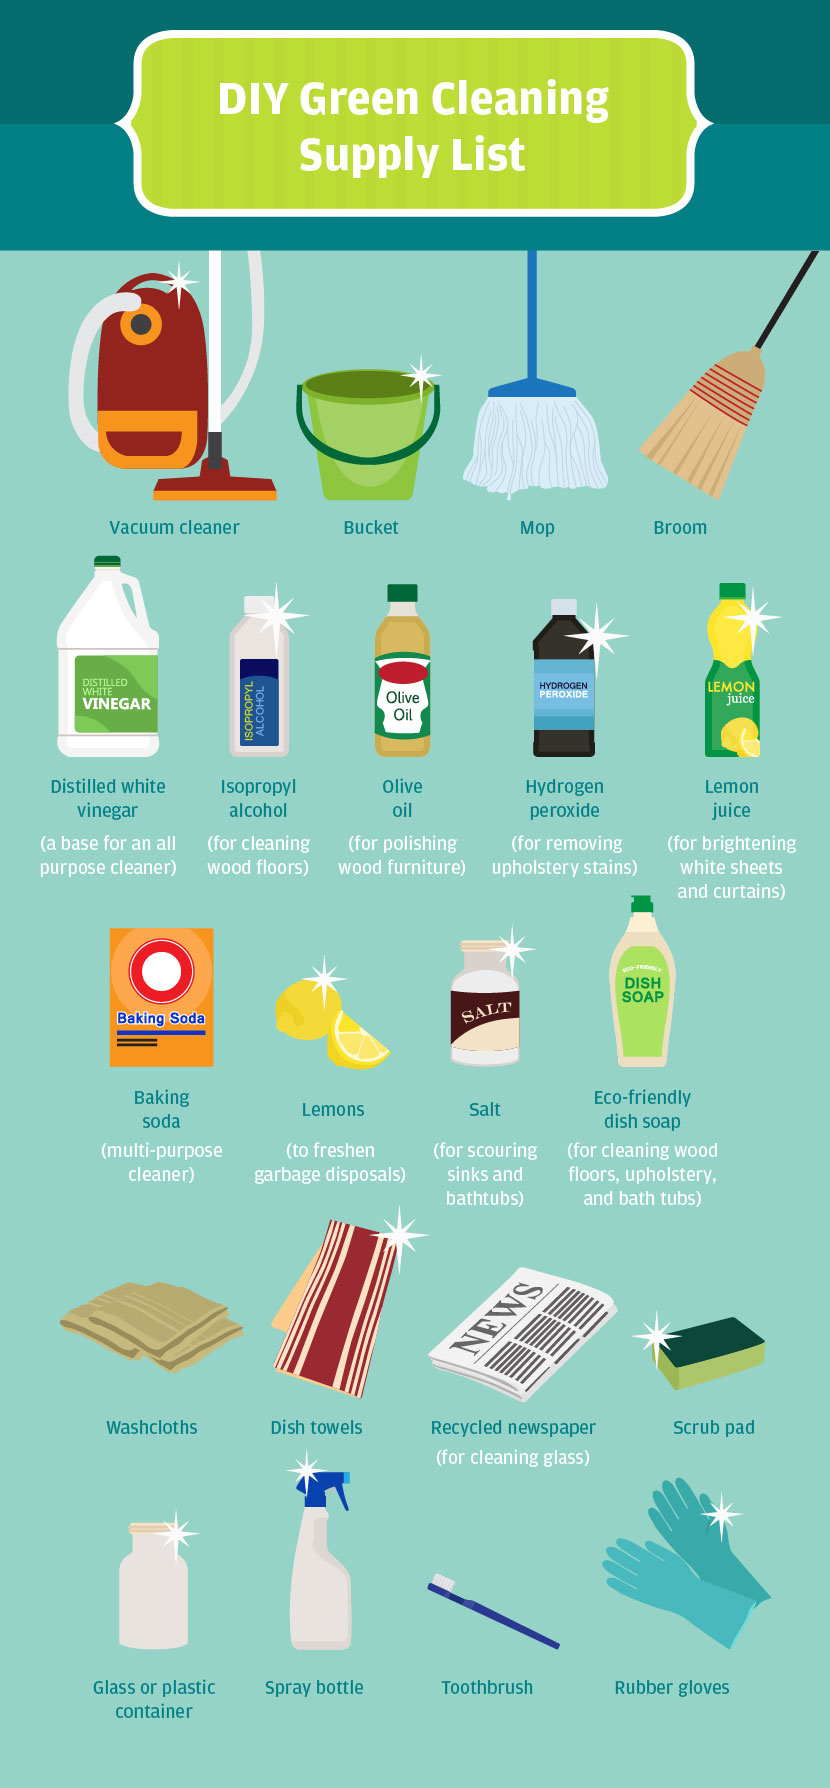 Diy Green Cleaning Supply List 001 